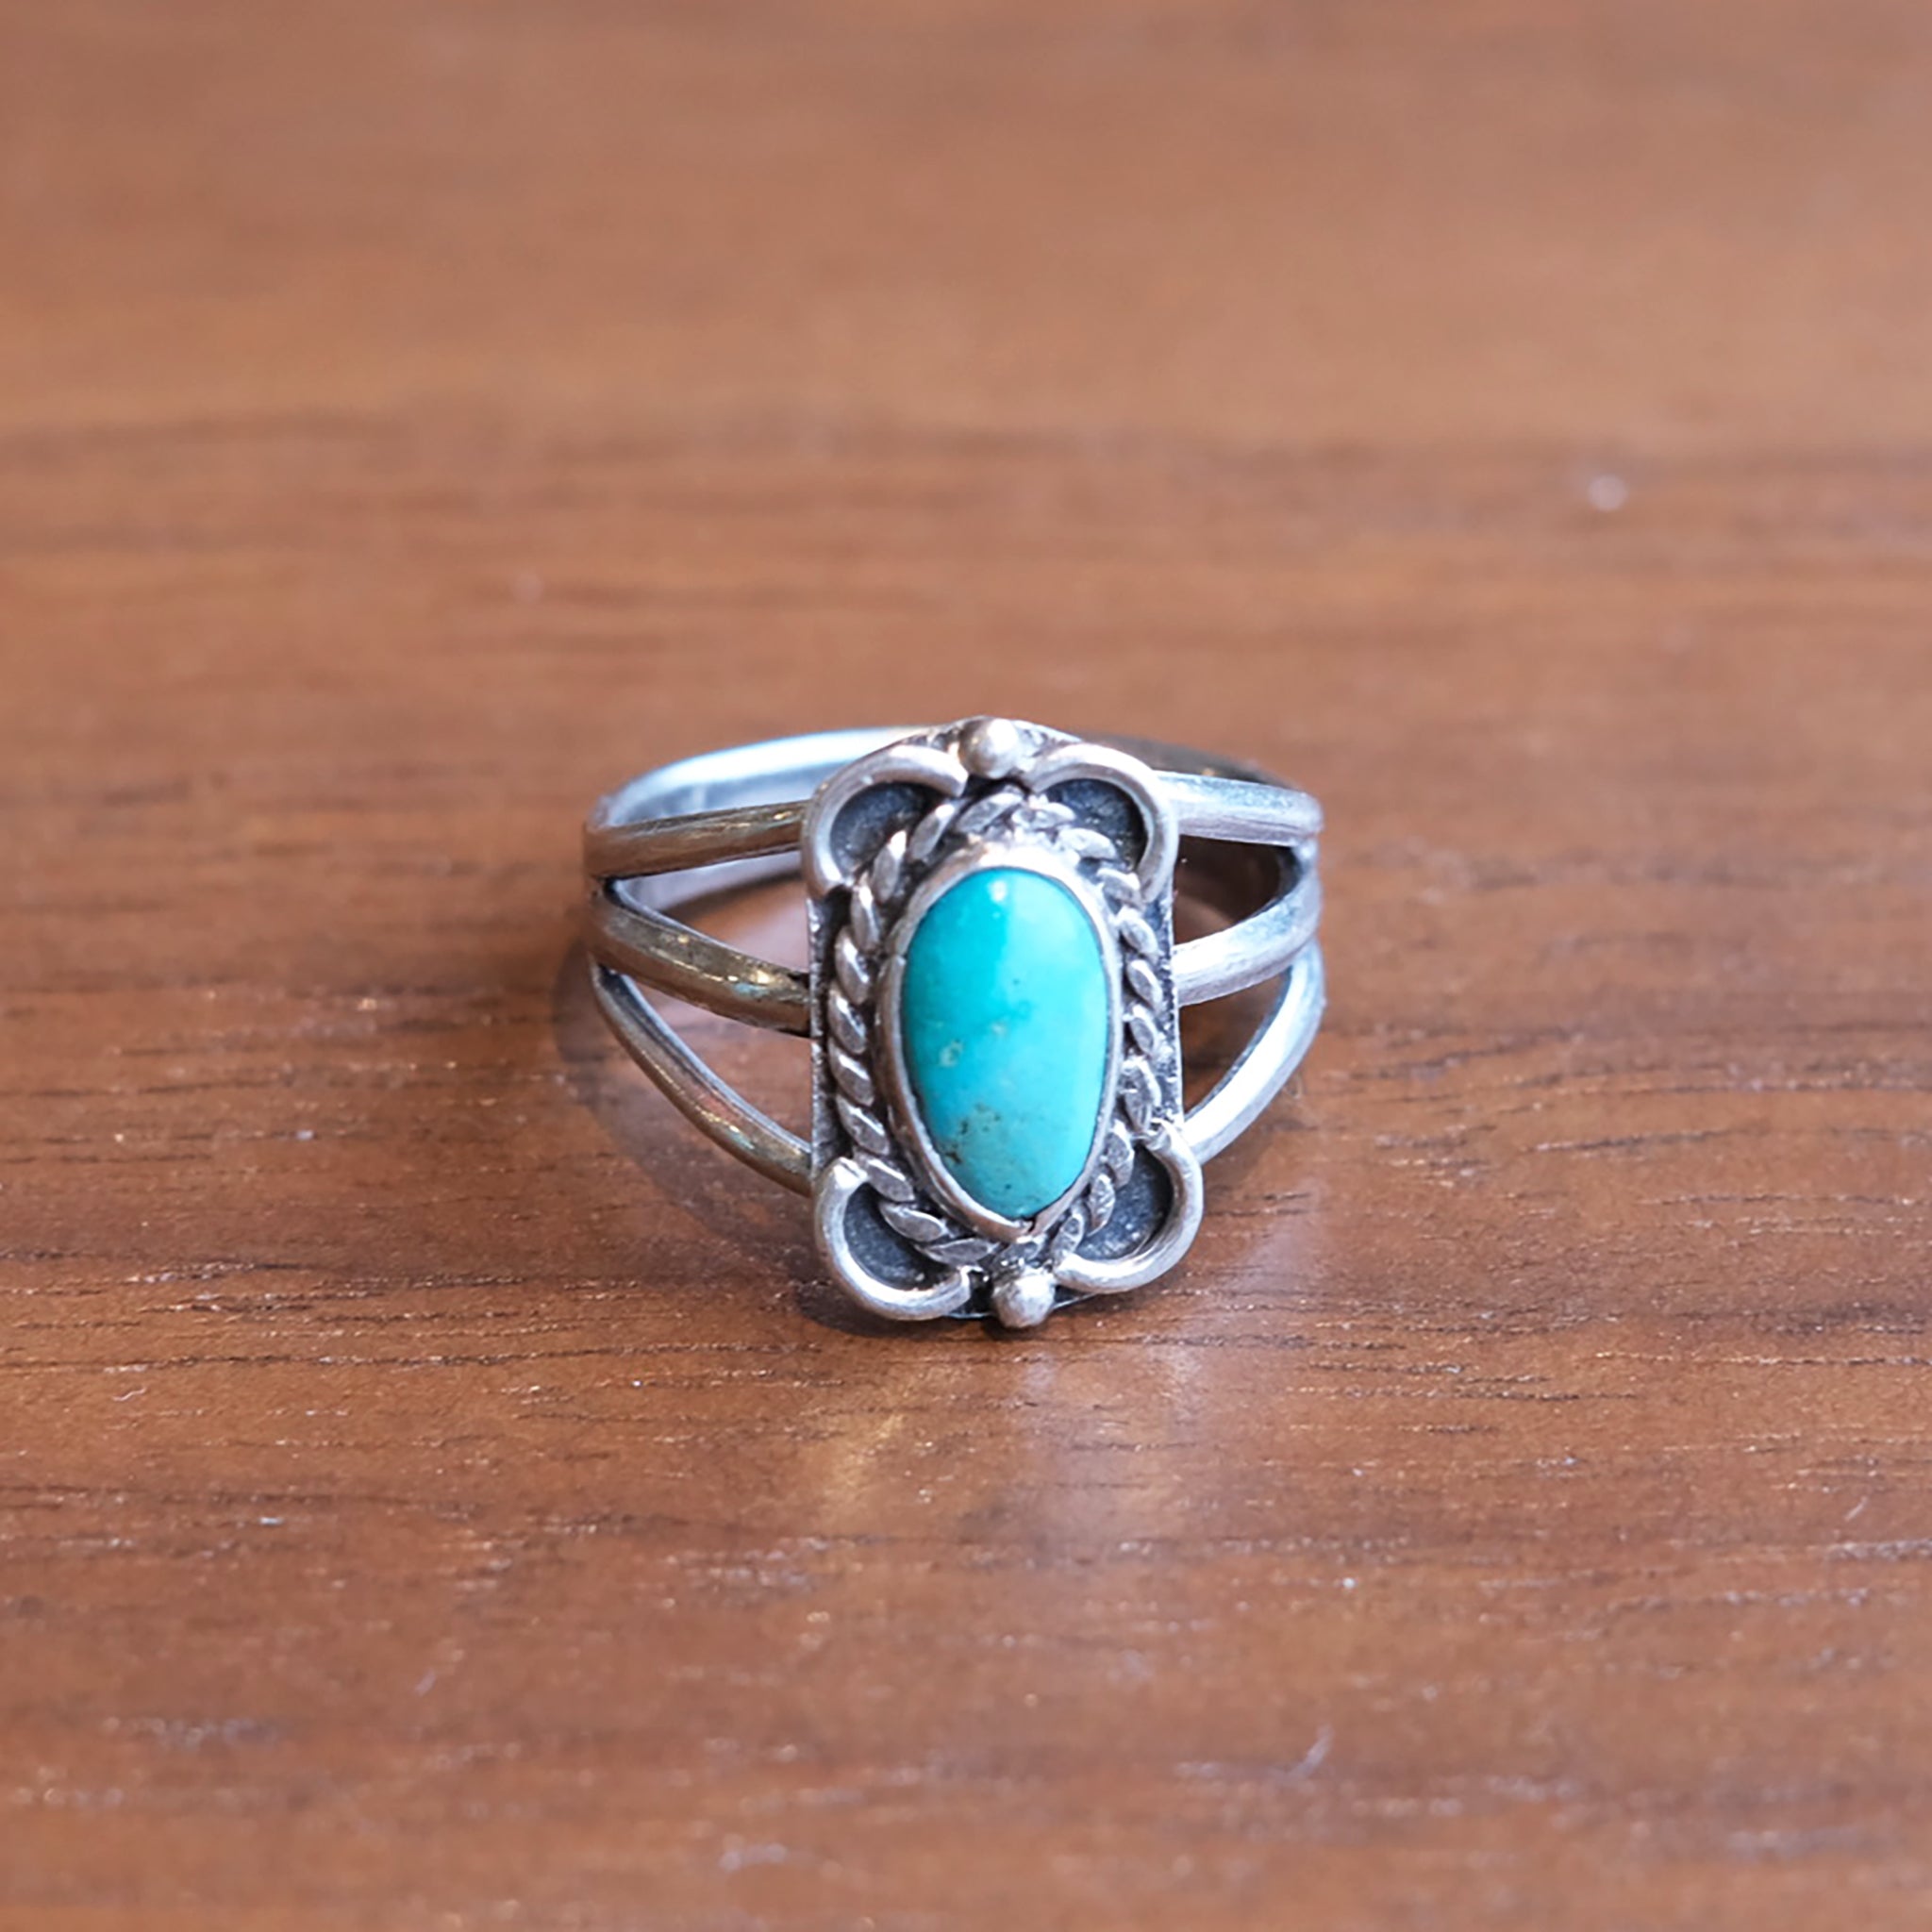 Light Turquoise Oval Ring Braid Setting